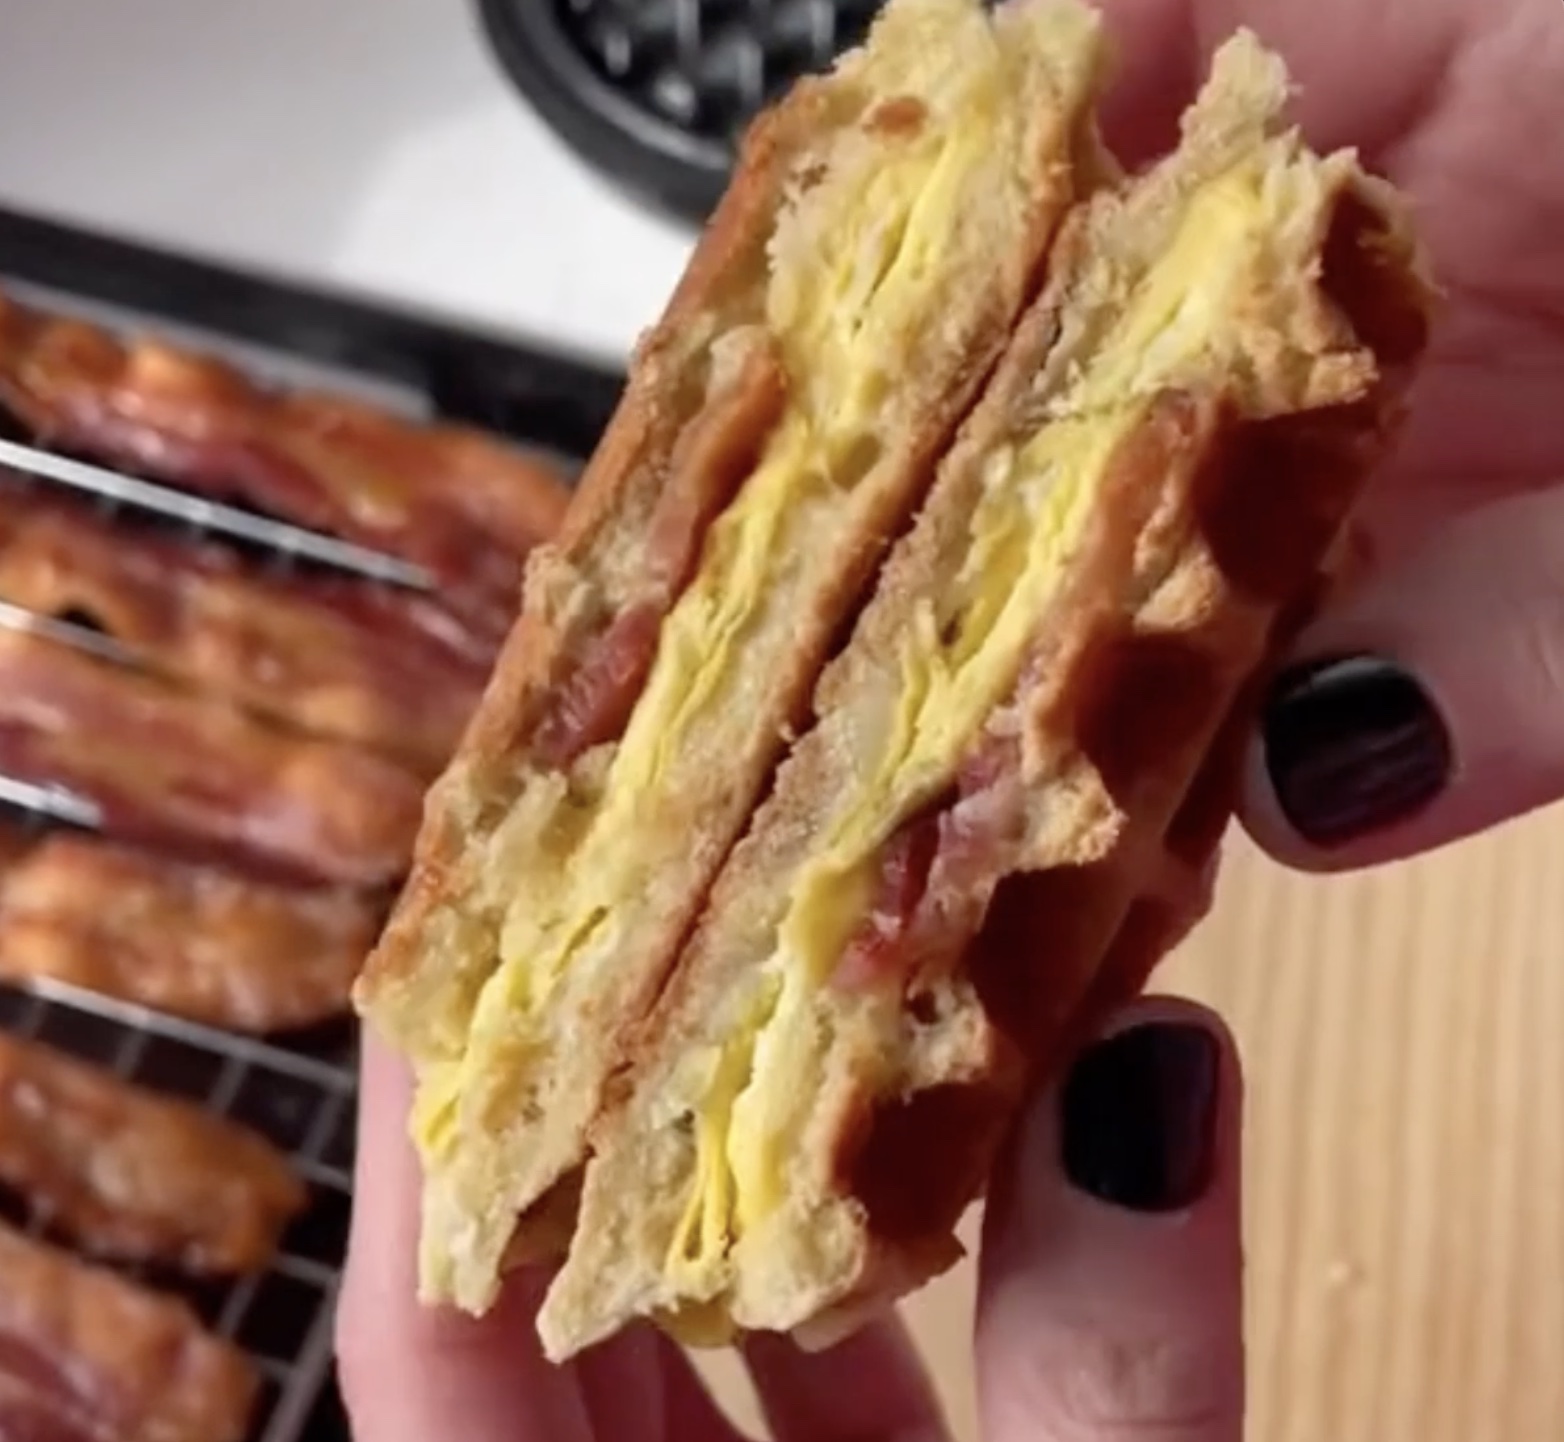 A Stuffed Waffle Breakfast Sandwich cut in half to display the layers of egg, bacon and cheese.